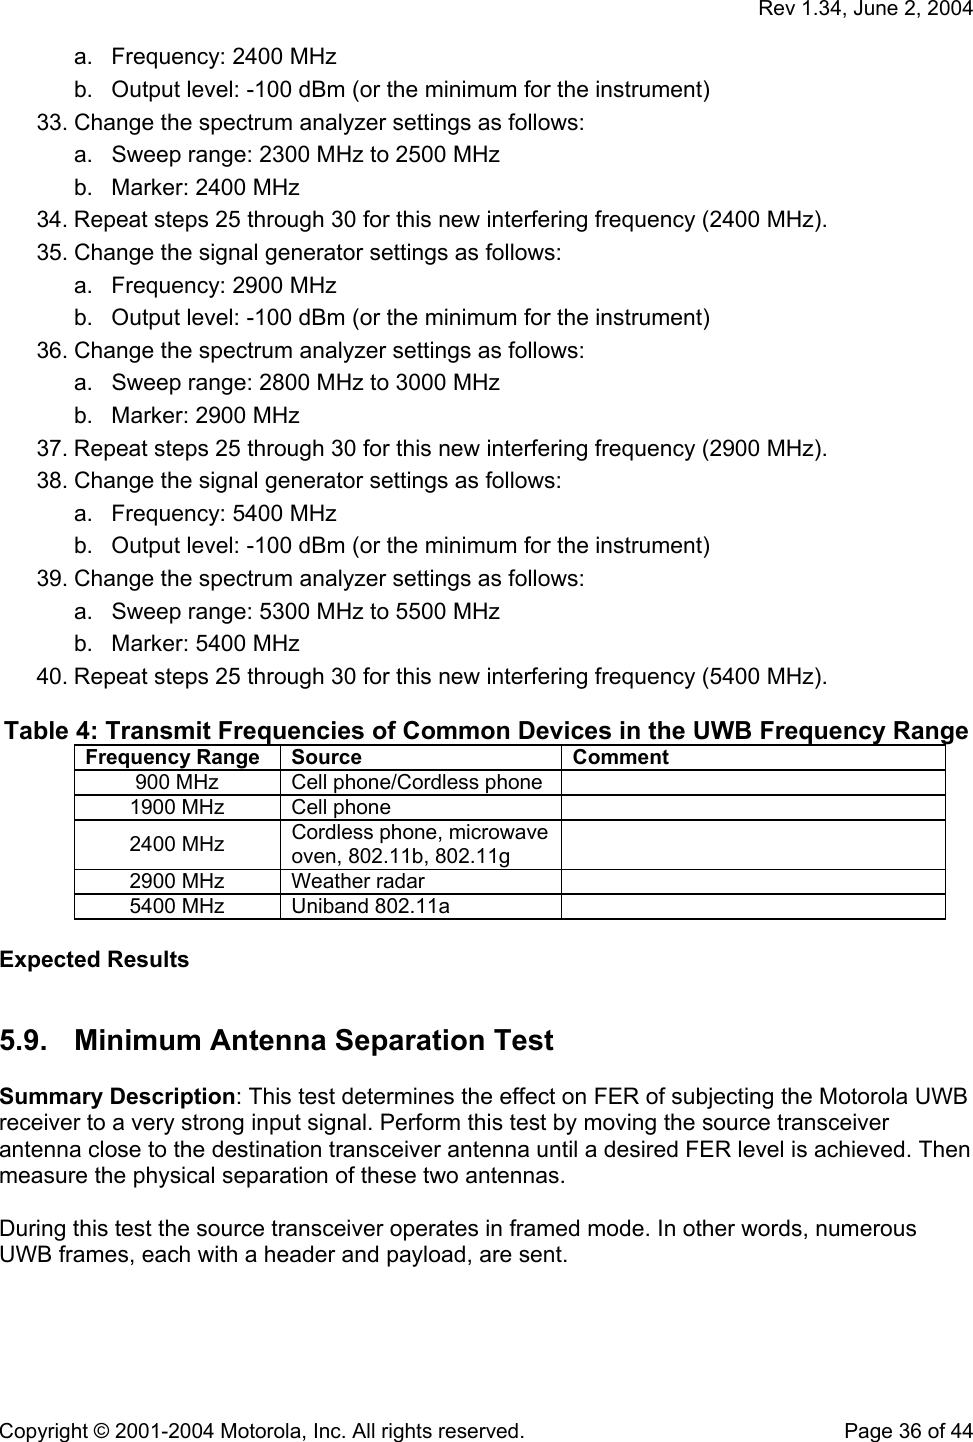   Rev 1.34, June 2, 2004  Copyright © 2001-2004 Motorola, Inc. All rights reserved.    Page 36 of 44 a.  Frequency: 2400 MHz b.  Output level: -100 dBm (or the minimum for the instrument) 33. Change the spectrum analyzer settings as follows: a.  Sweep range: 2300 MHz to 2500 MHz b.  Marker: 2400 MHz  34. Repeat steps 25 through 30 for this new interfering frequency (2400 MHz). 35. Change the signal generator settings as follows: a.  Frequency: 2900 MHz b.  Output level: -100 dBm (or the minimum for the instrument) 36. Change the spectrum analyzer settings as follows: a.  Sweep range: 2800 MHz to 3000 MHz b.  Marker: 2900 MHz  37. Repeat steps 25 through 30 for this new interfering frequency (2900 MHz). 38. Change the signal generator settings as follows: a.  Frequency: 5400 MHz b.  Output level: -100 dBm (or the minimum for the instrument) 39. Change the spectrum analyzer settings as follows: a.  Sweep range: 5300 MHz to 5500 MHz b.  Marker: 5400 MHz  40. Repeat steps 25 through 30 for this new interfering frequency (5400 MHz).  Table 4: Transmit Frequencies of Common Devices in the UWB Frequency Range Frequency Range  Source  Comment 900 MHz  Cell phone/Cordless phone   1900 MHz  Cell phone   2400 MHz  Cordless phone, microwave oven, 802.11b, 802.11g  2900 MHz  Weather radar   5400 MHz  Uniband 802.11a    Expected Results  5.9.  Minimum Antenna Separation Test  Summary Description: This test determines the effect on FER of subjecting the Motorola UWB receiver to a very strong input signal. Perform this test by moving the source transceiver antenna close to the destination transceiver antenna until a desired FER level is achieved. Then measure the physical separation of these two antennas.  During this test the source transceiver operates in framed mode. In other words, numerous UWB frames, each with a header and payload, are sent.  